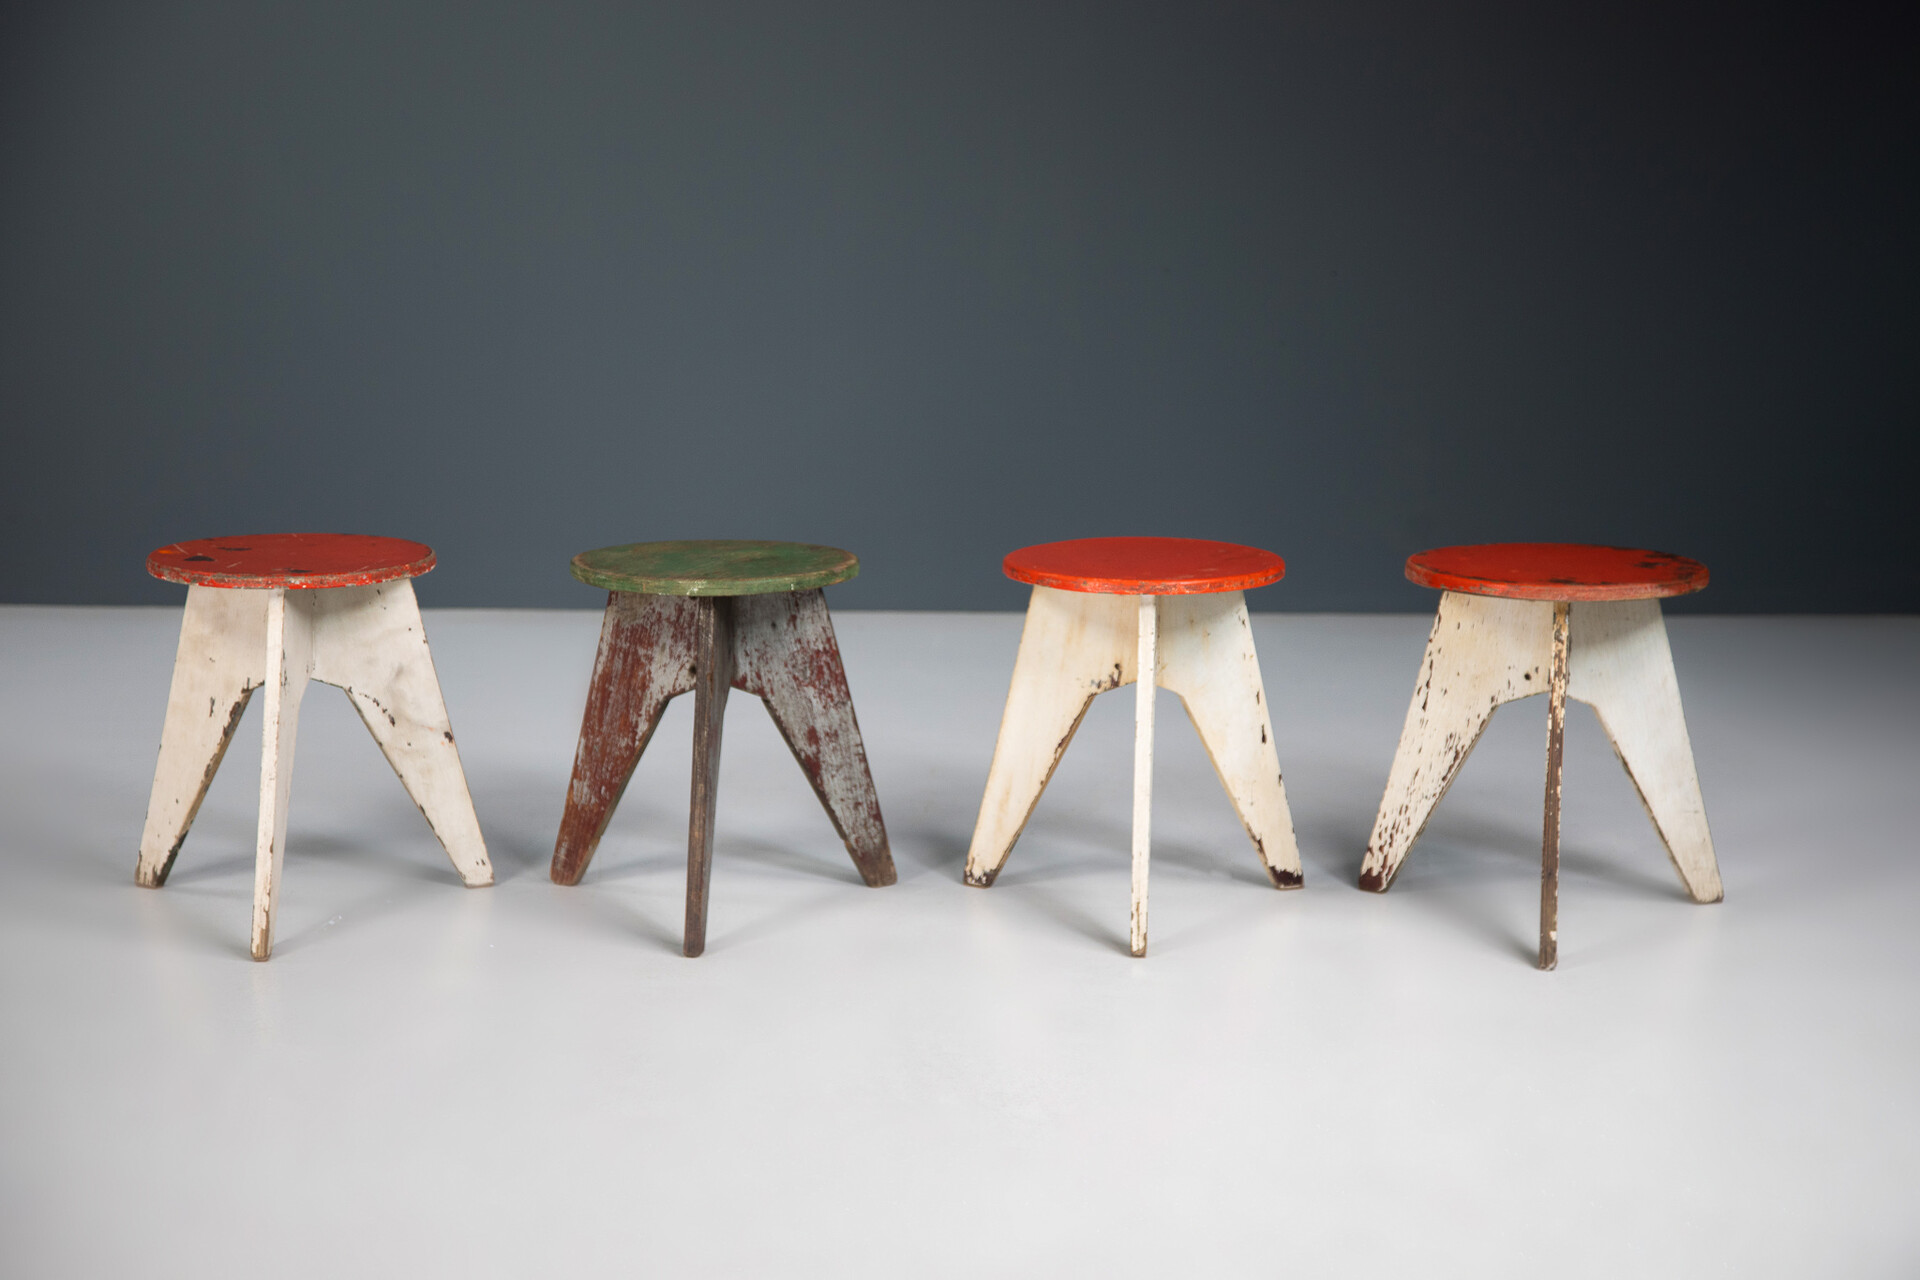 Mid century modern Set of 4 Tabouret Stools in the style of Jean Prouvé , France 1950s Mid-20th century